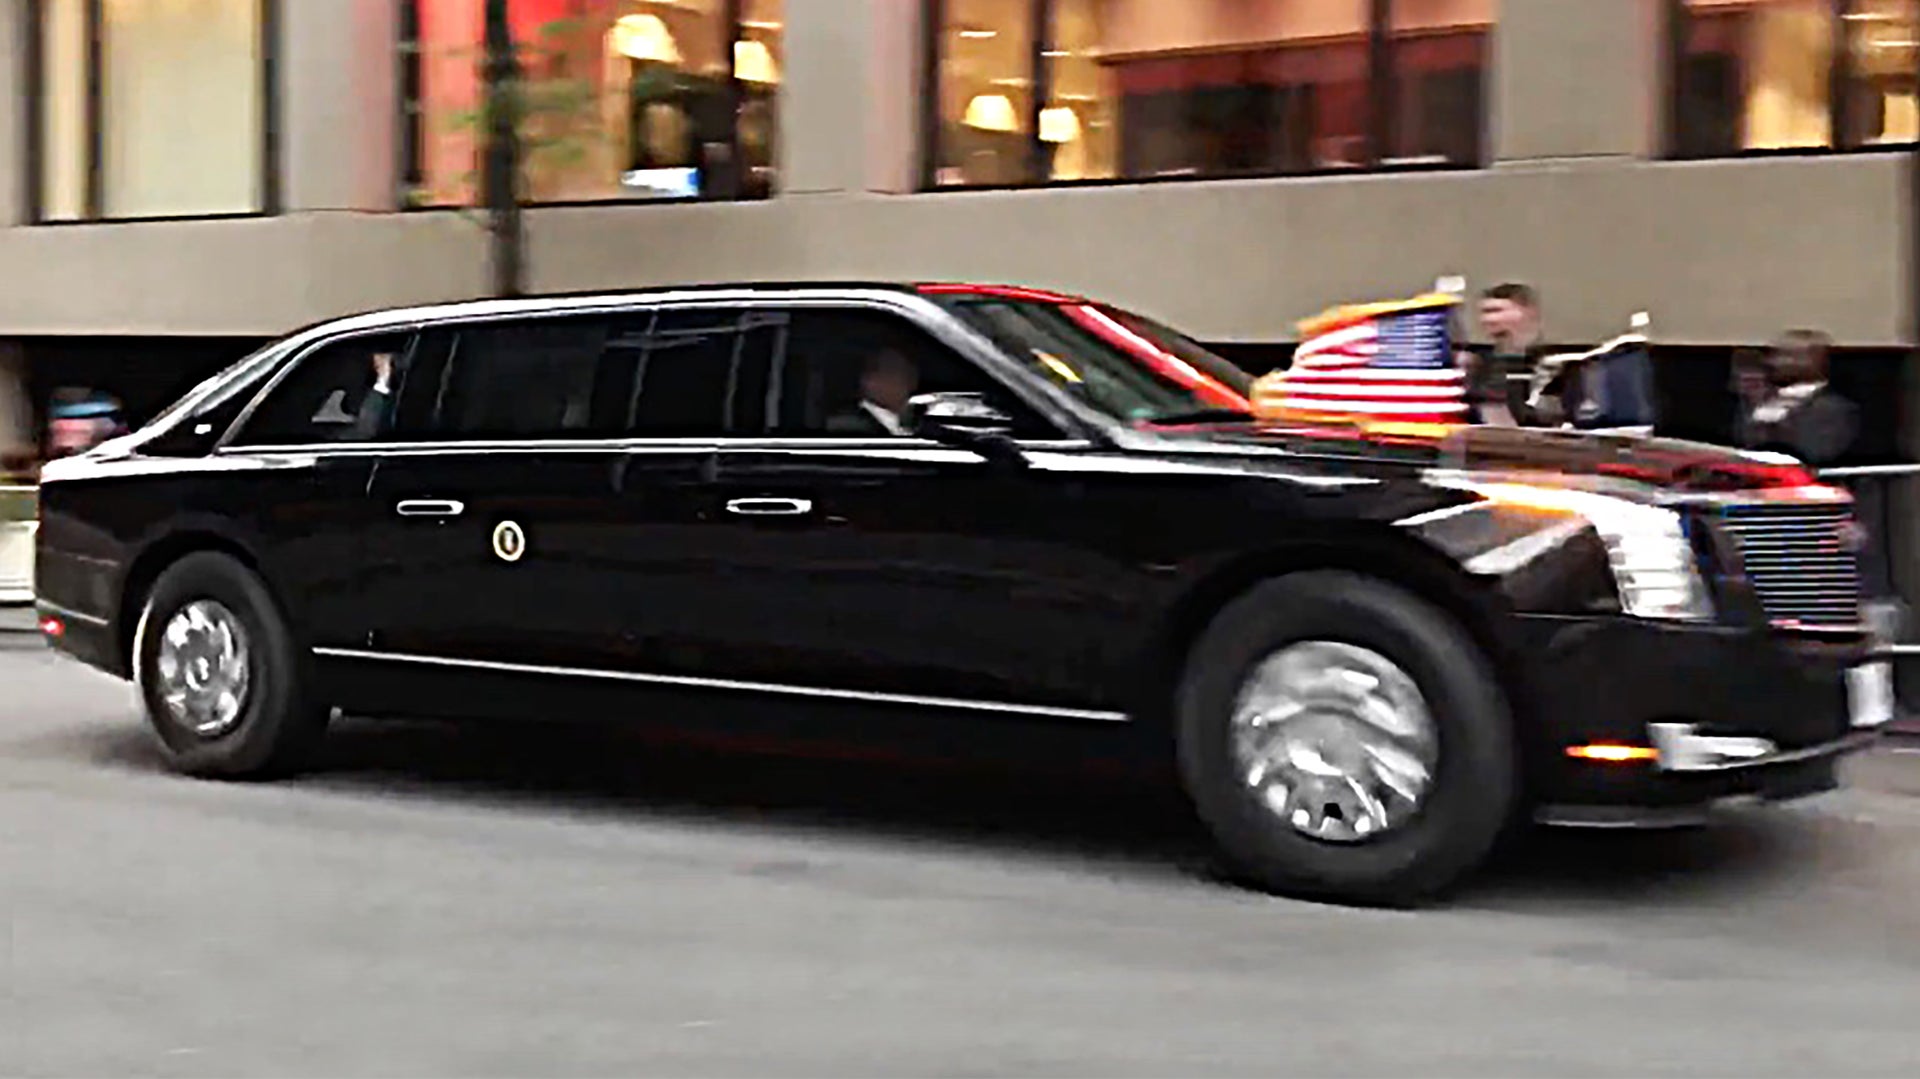 Brand New ‘Beast’ Presidential Limousine Emerges During Trump’s Visit To NYC